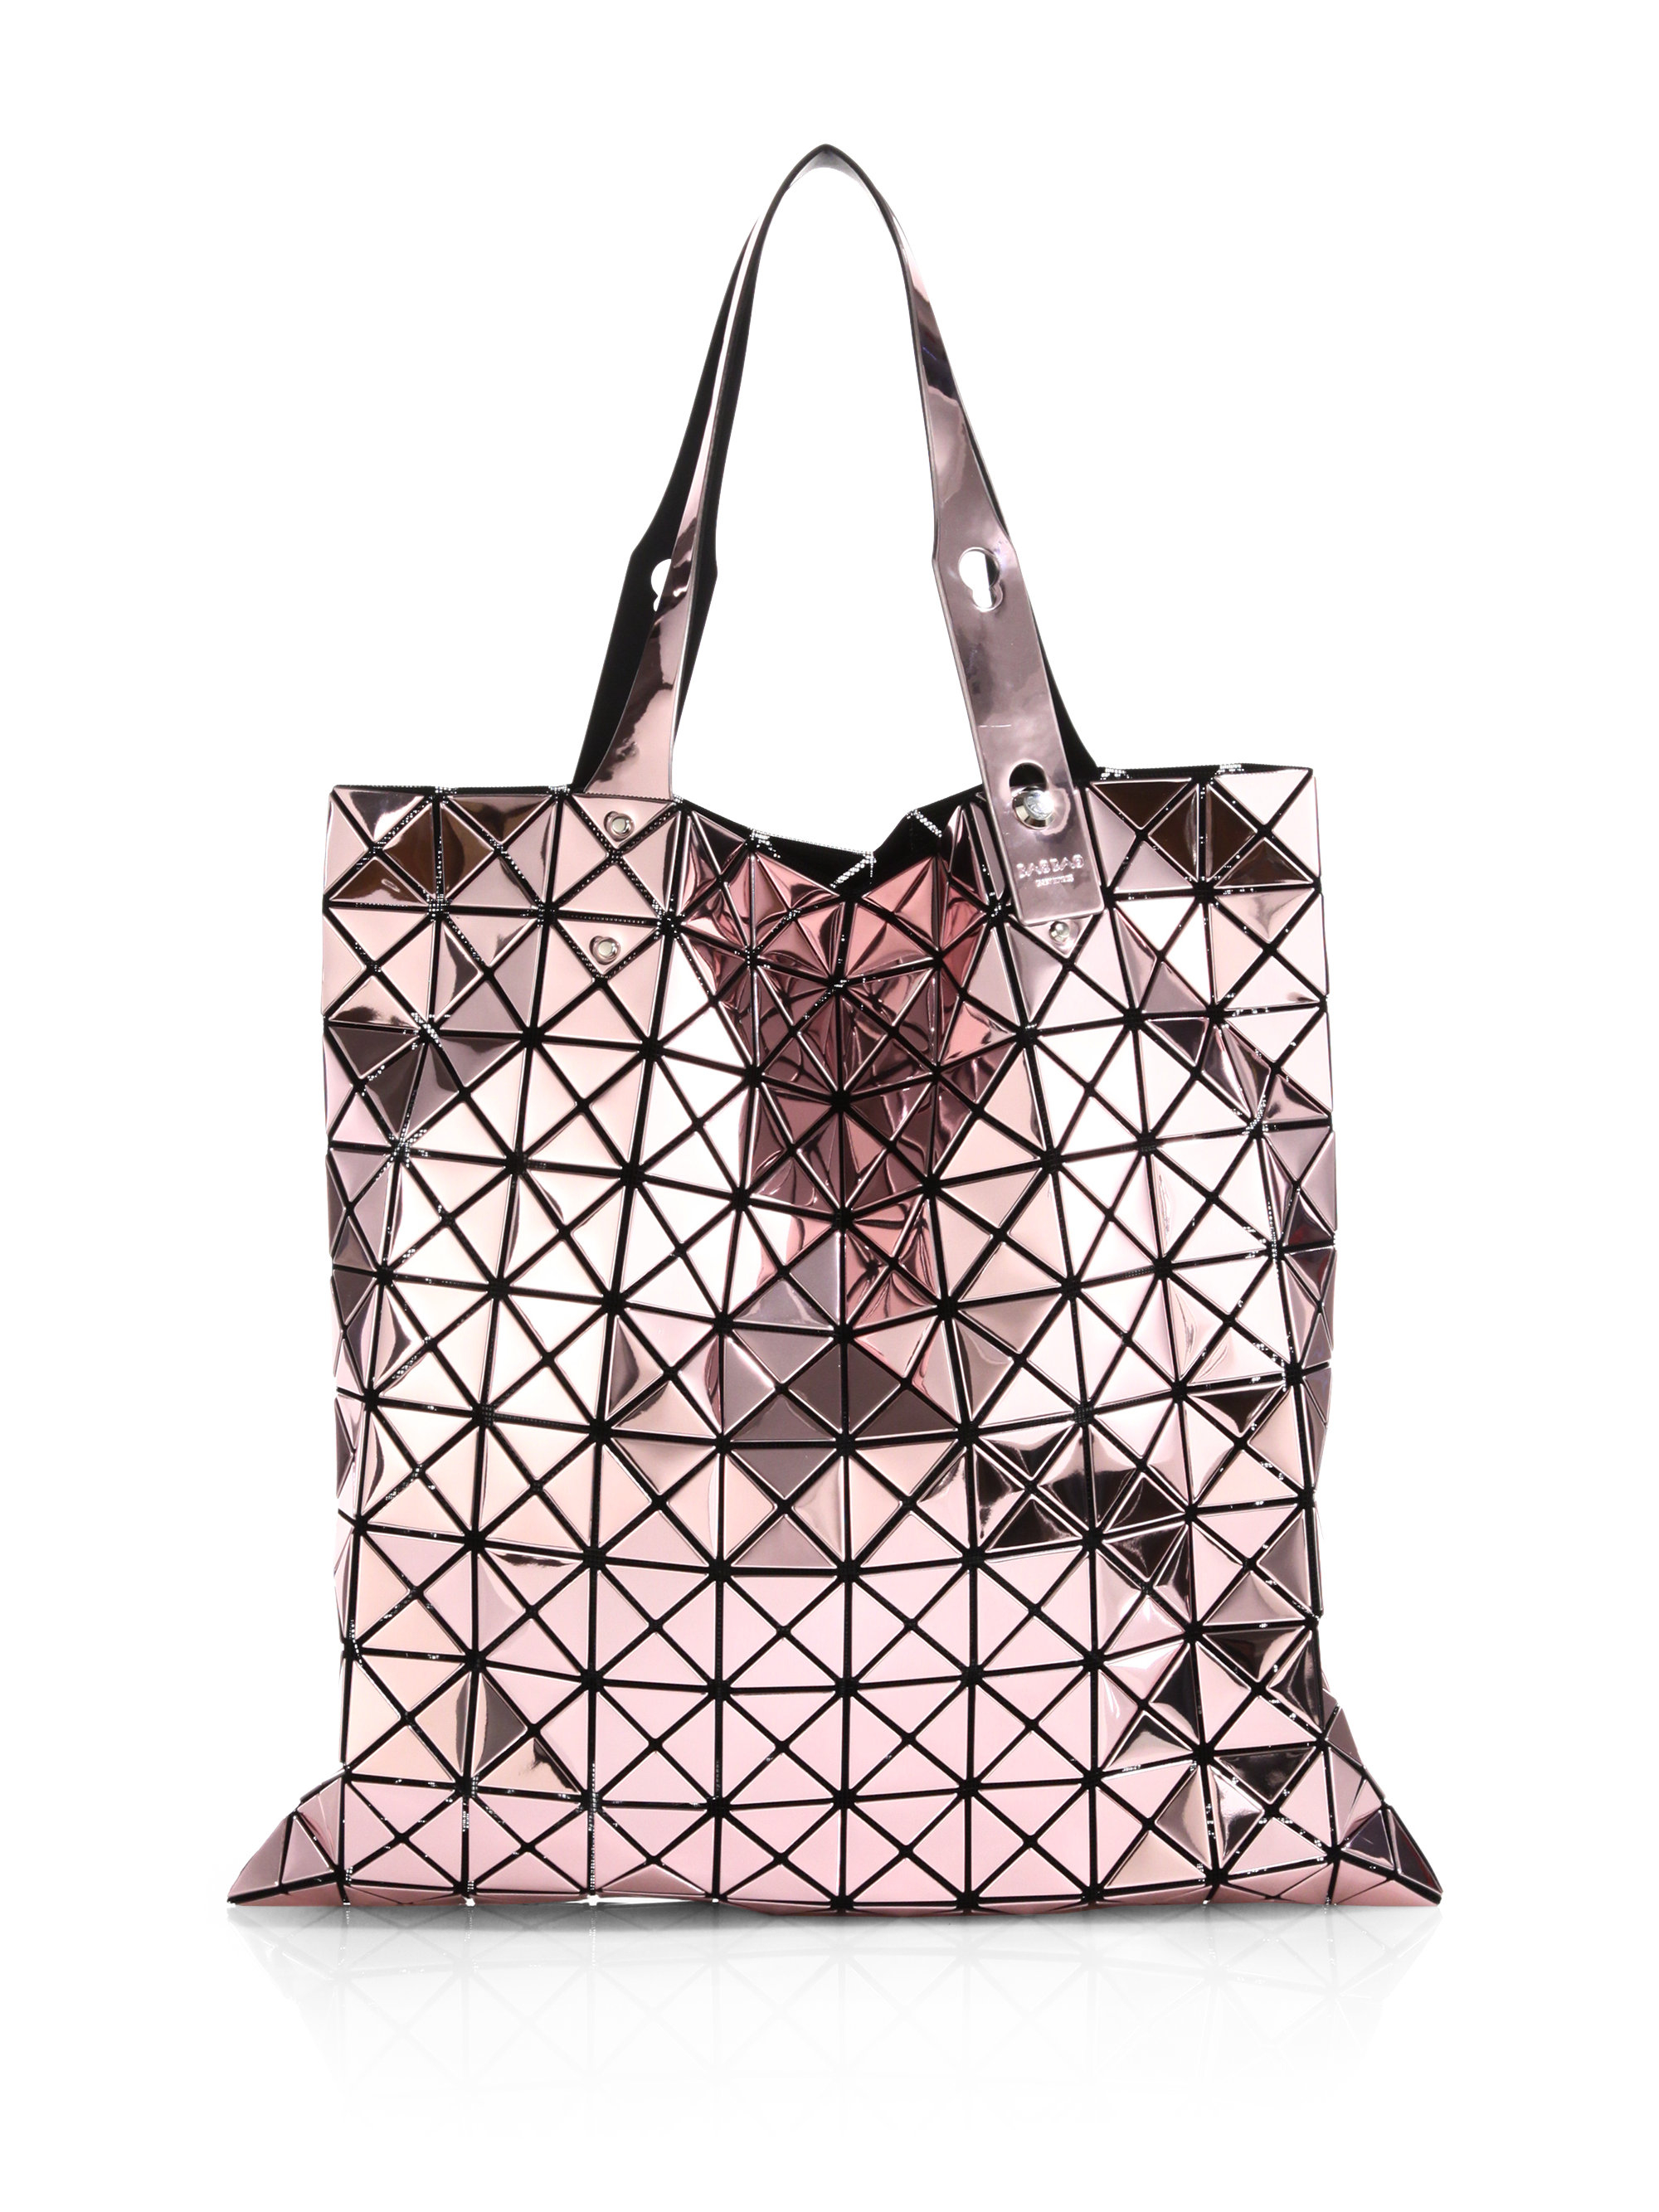 Lyst - Bao Bao Issey Miyake Prism Metallic Faux-Leather Tote in Pink